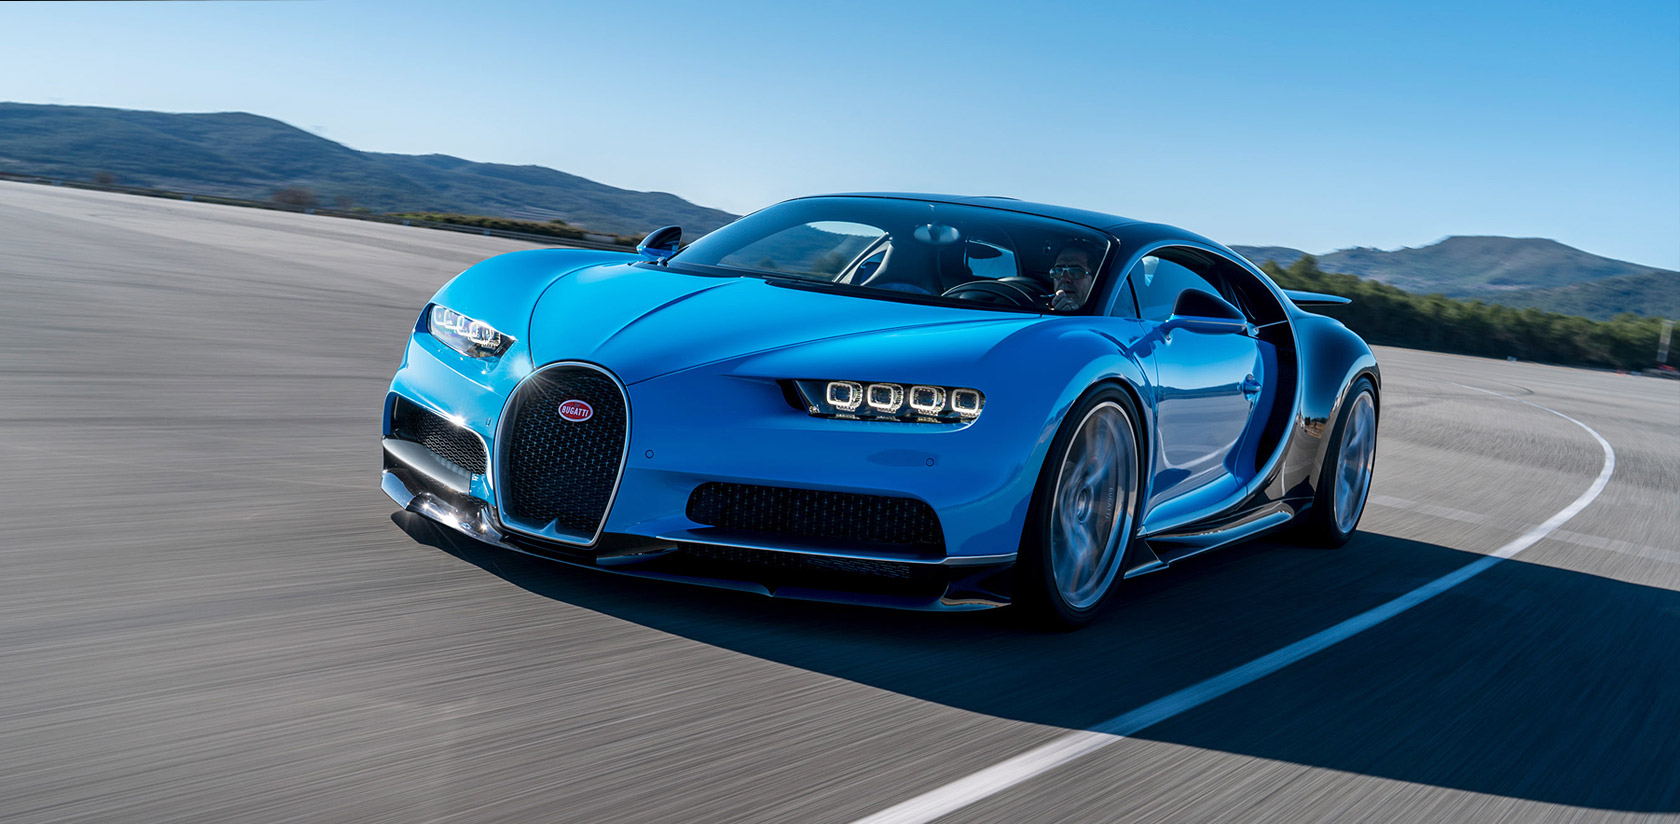 https://www.supercars.net/blog/wp-content/uploads/2016/04/chiron_stage_01.jpg